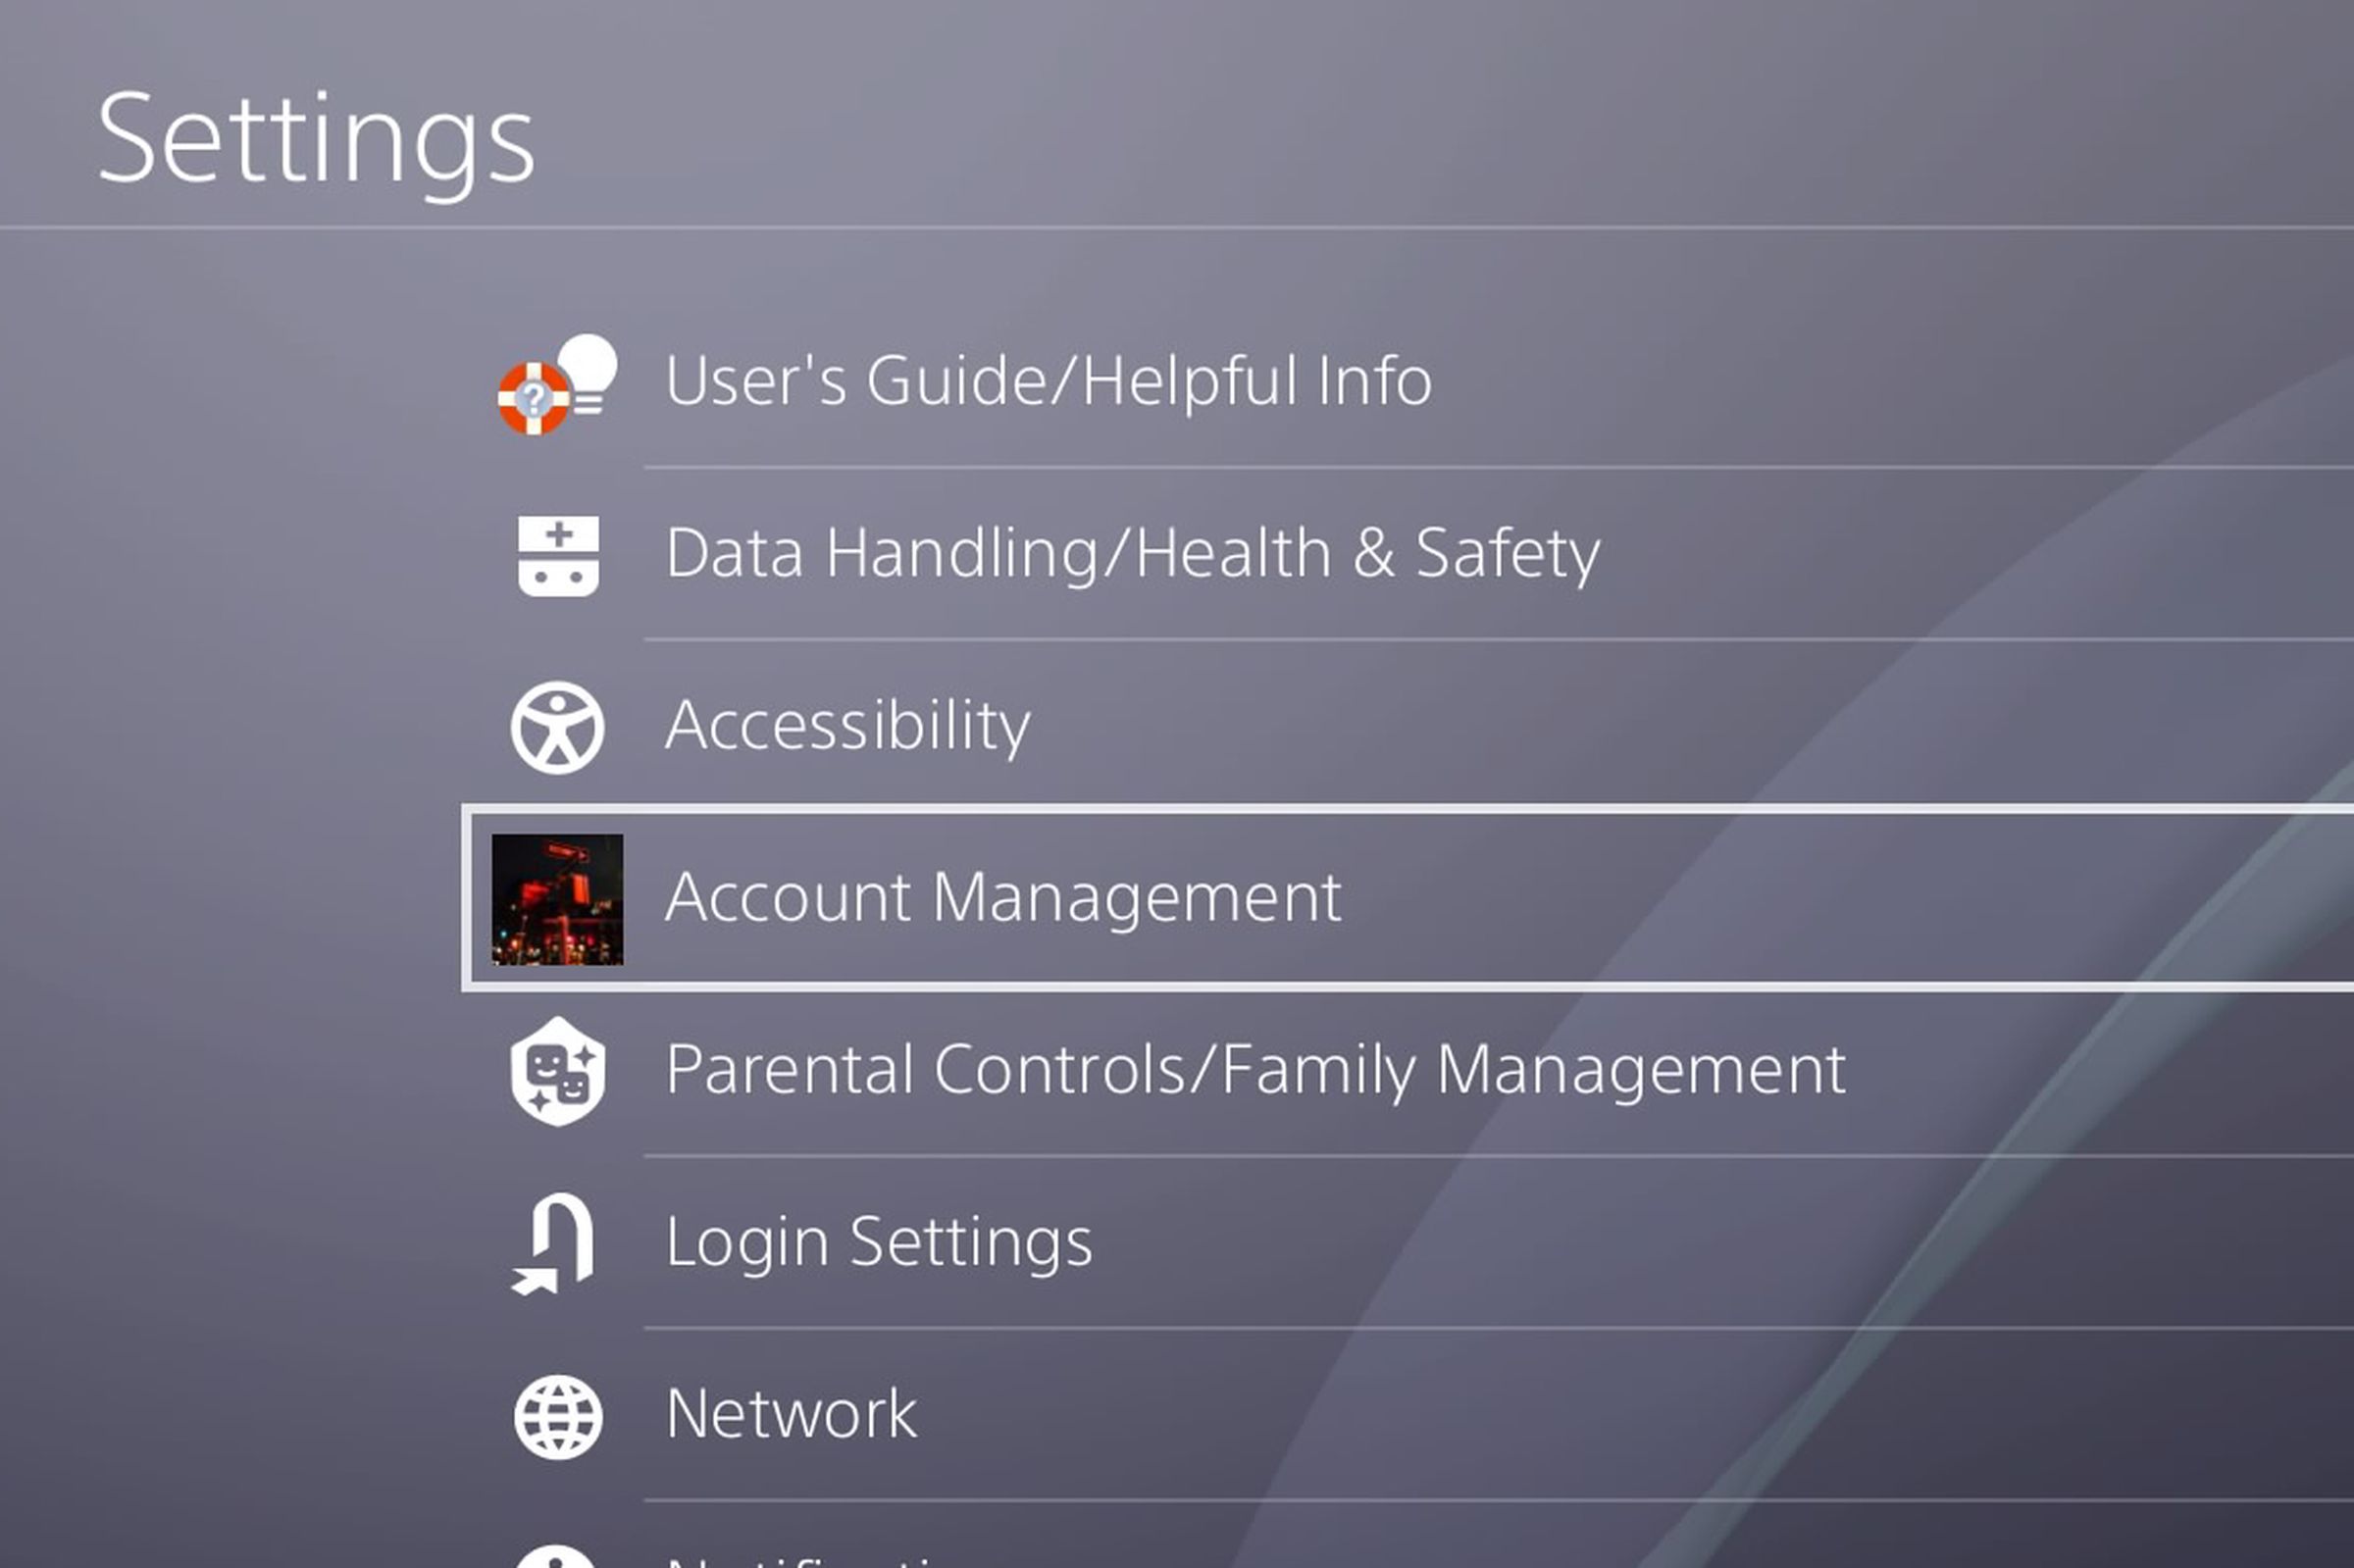 The Account Management tab in the Settings menu